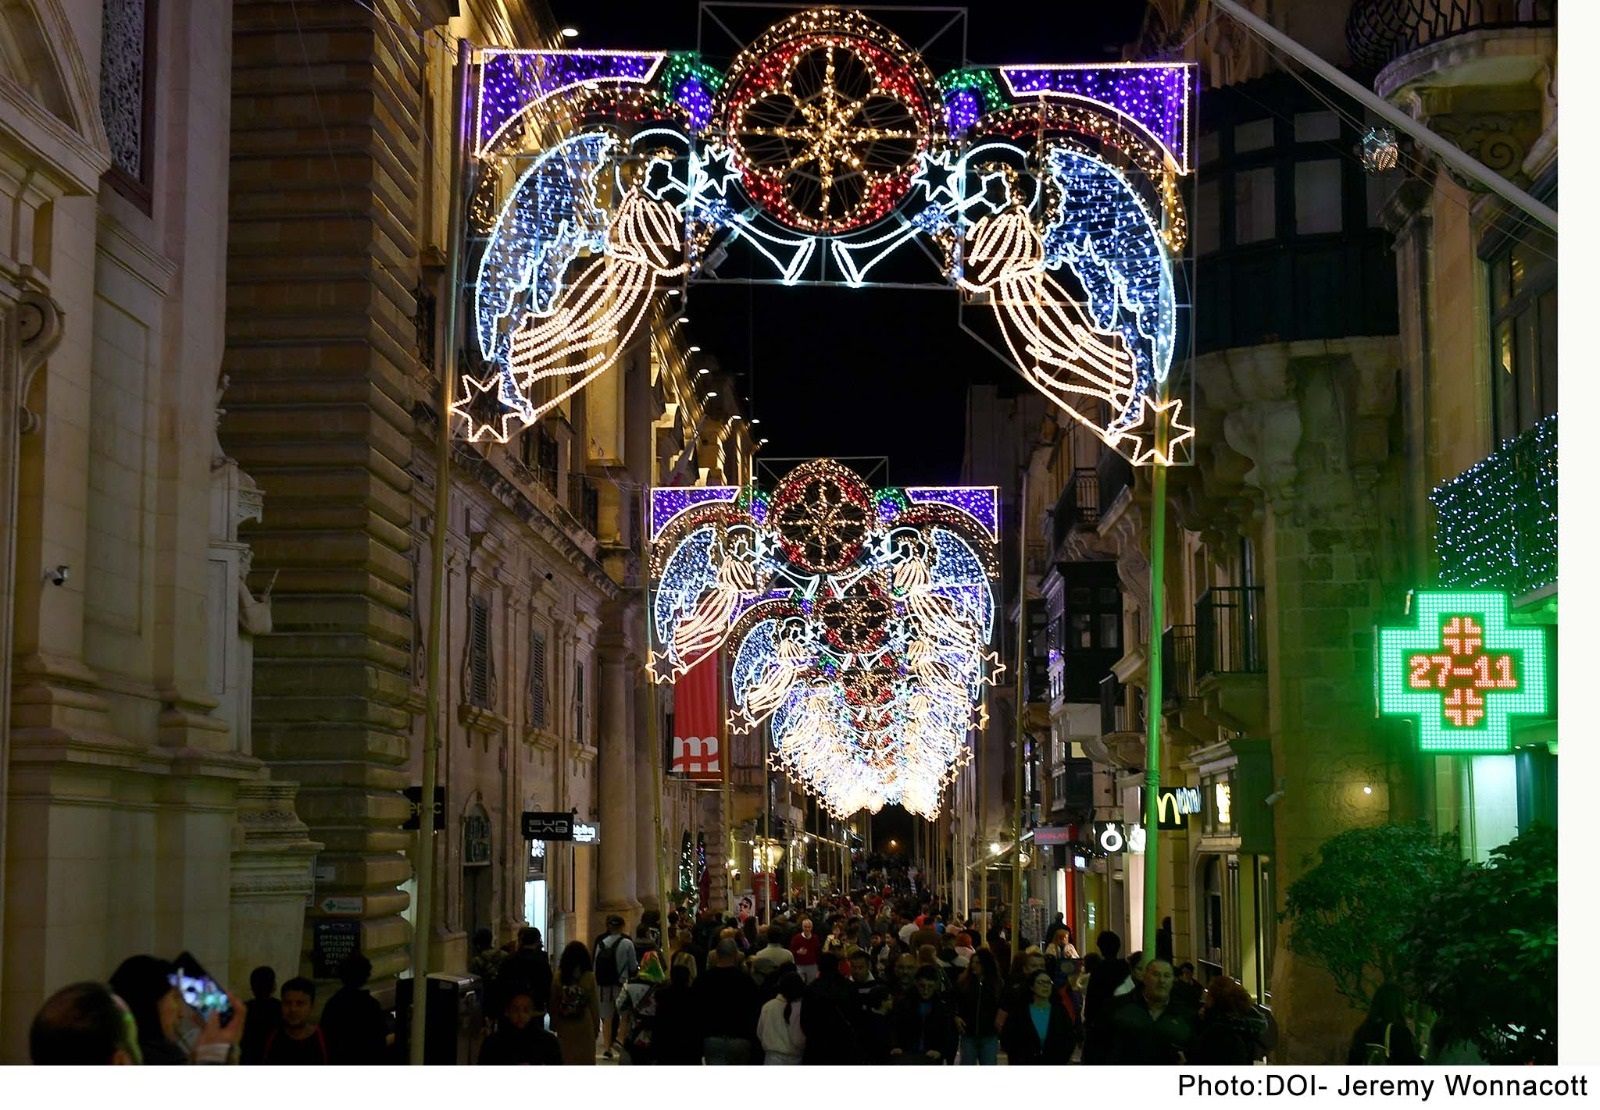 Experience the Magic of Christmas in the Valletta!